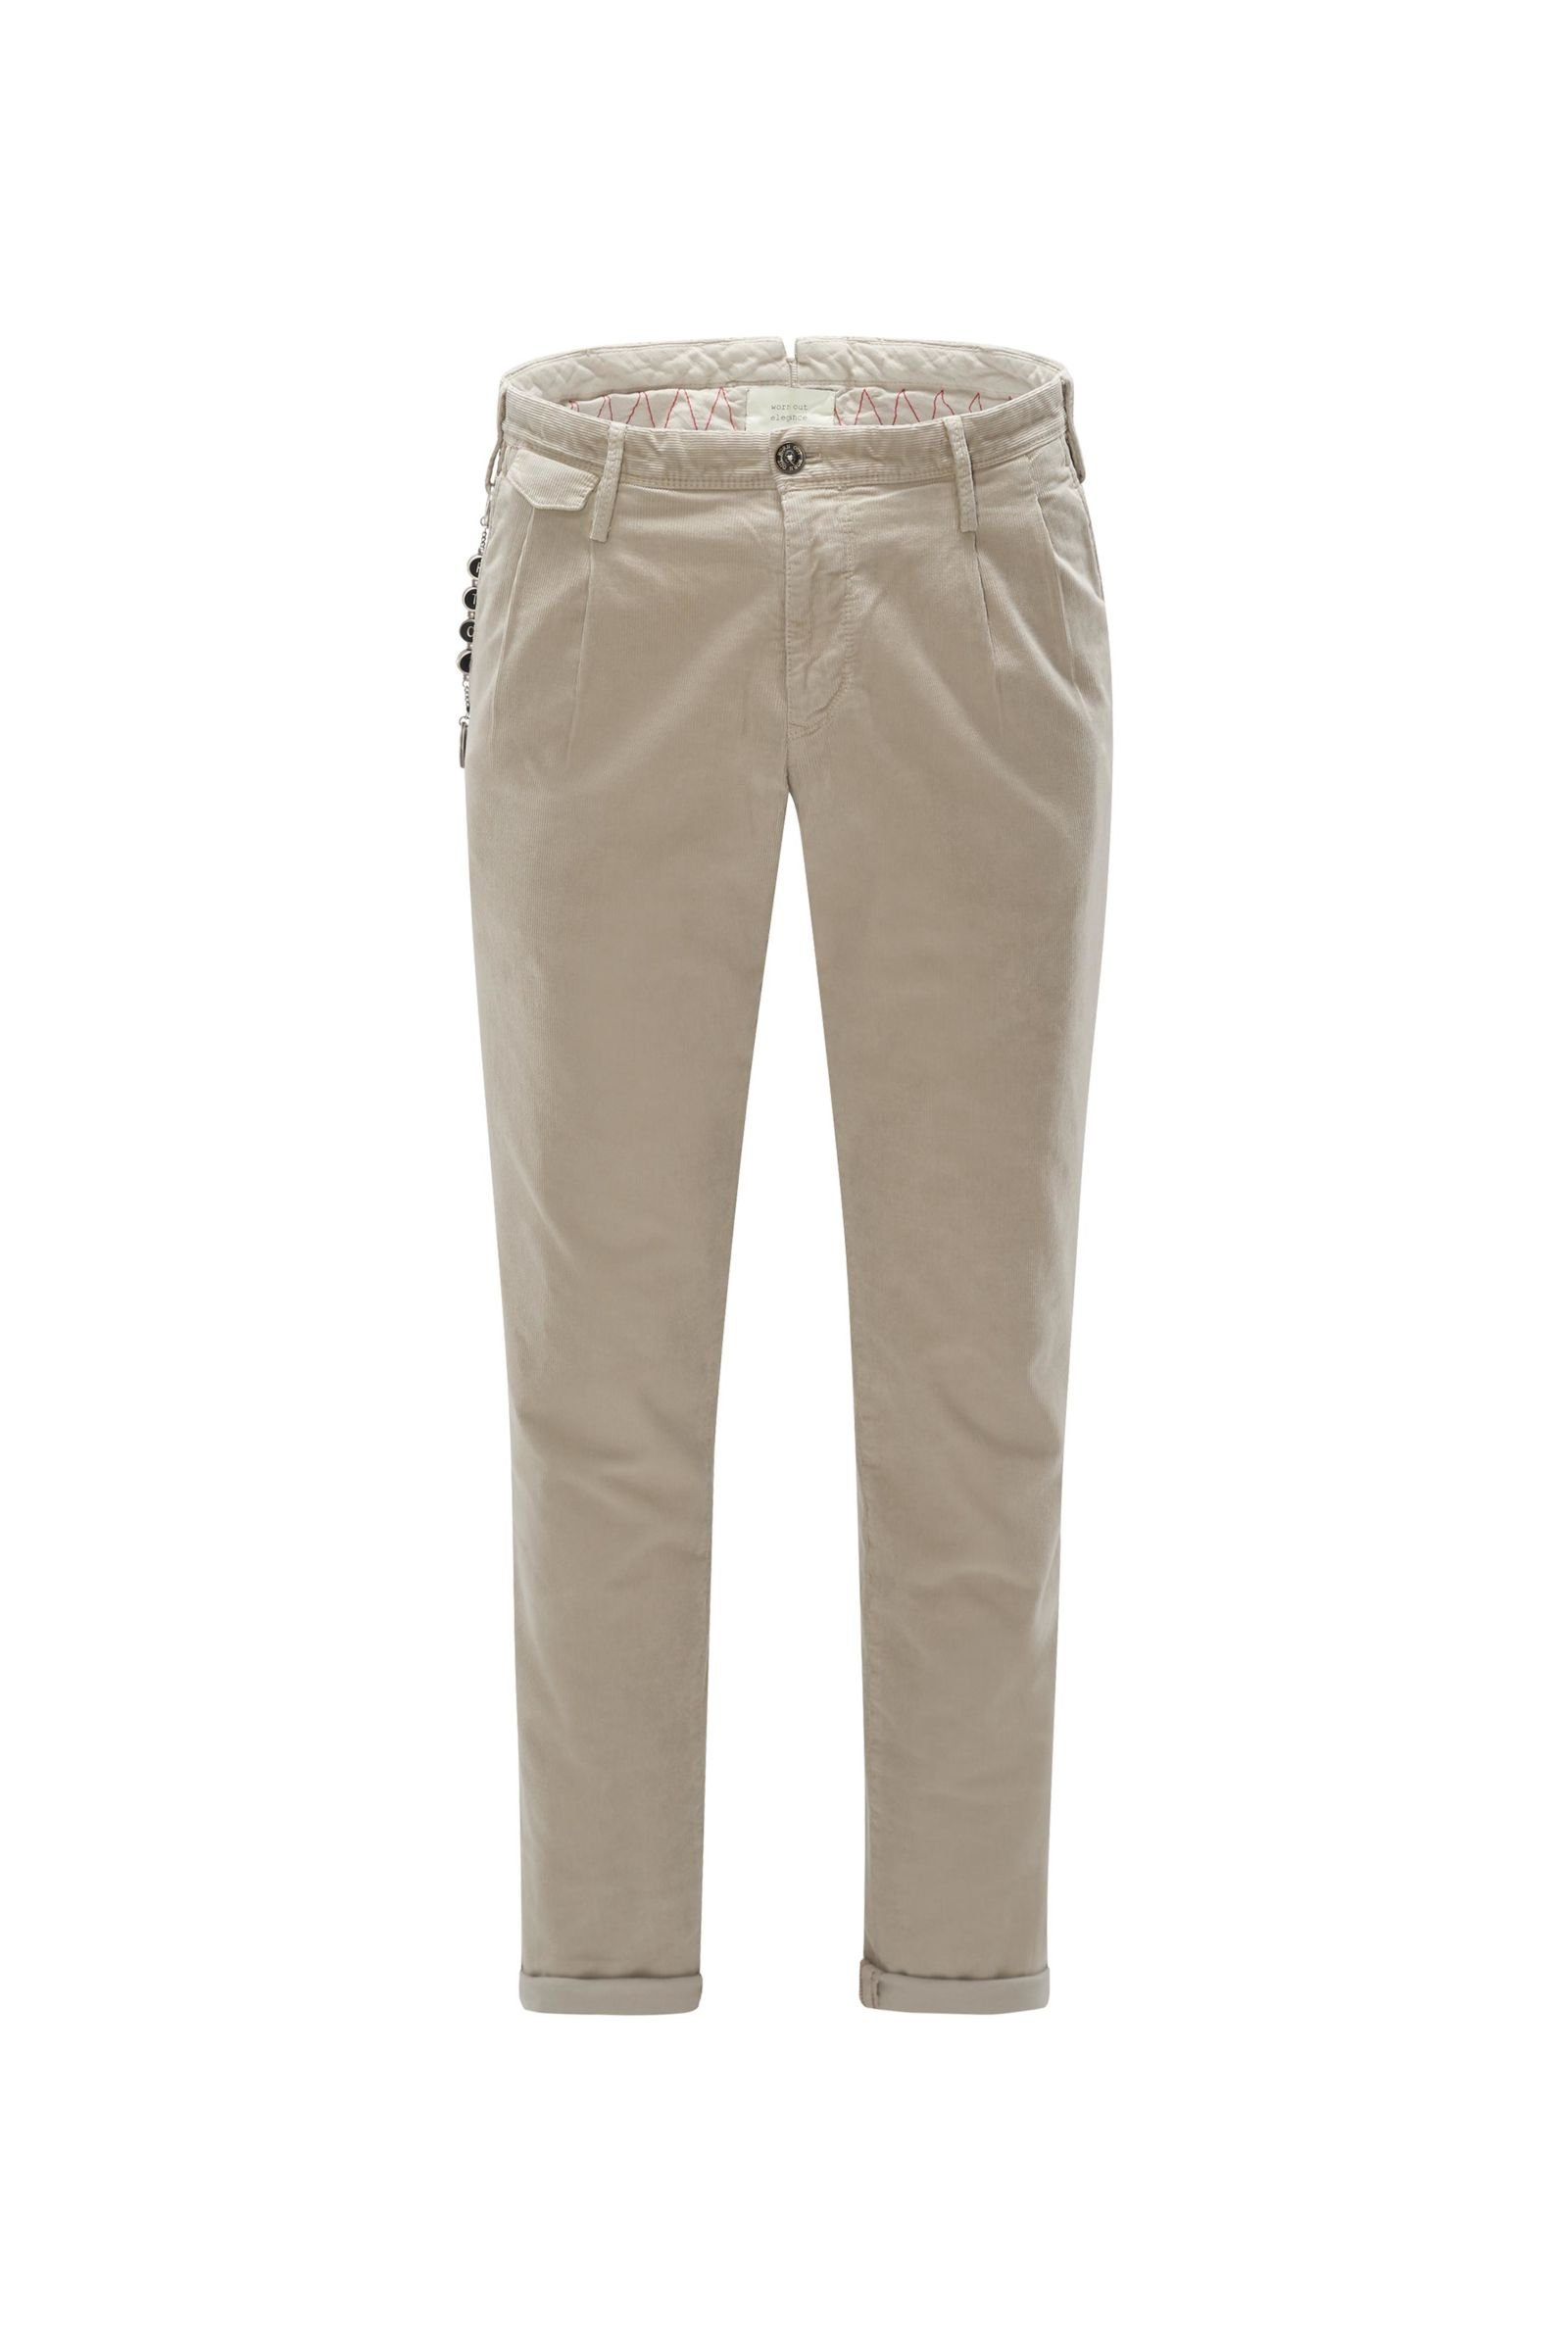 Corduroy trousers 'Arial Worn out Elegance' beige